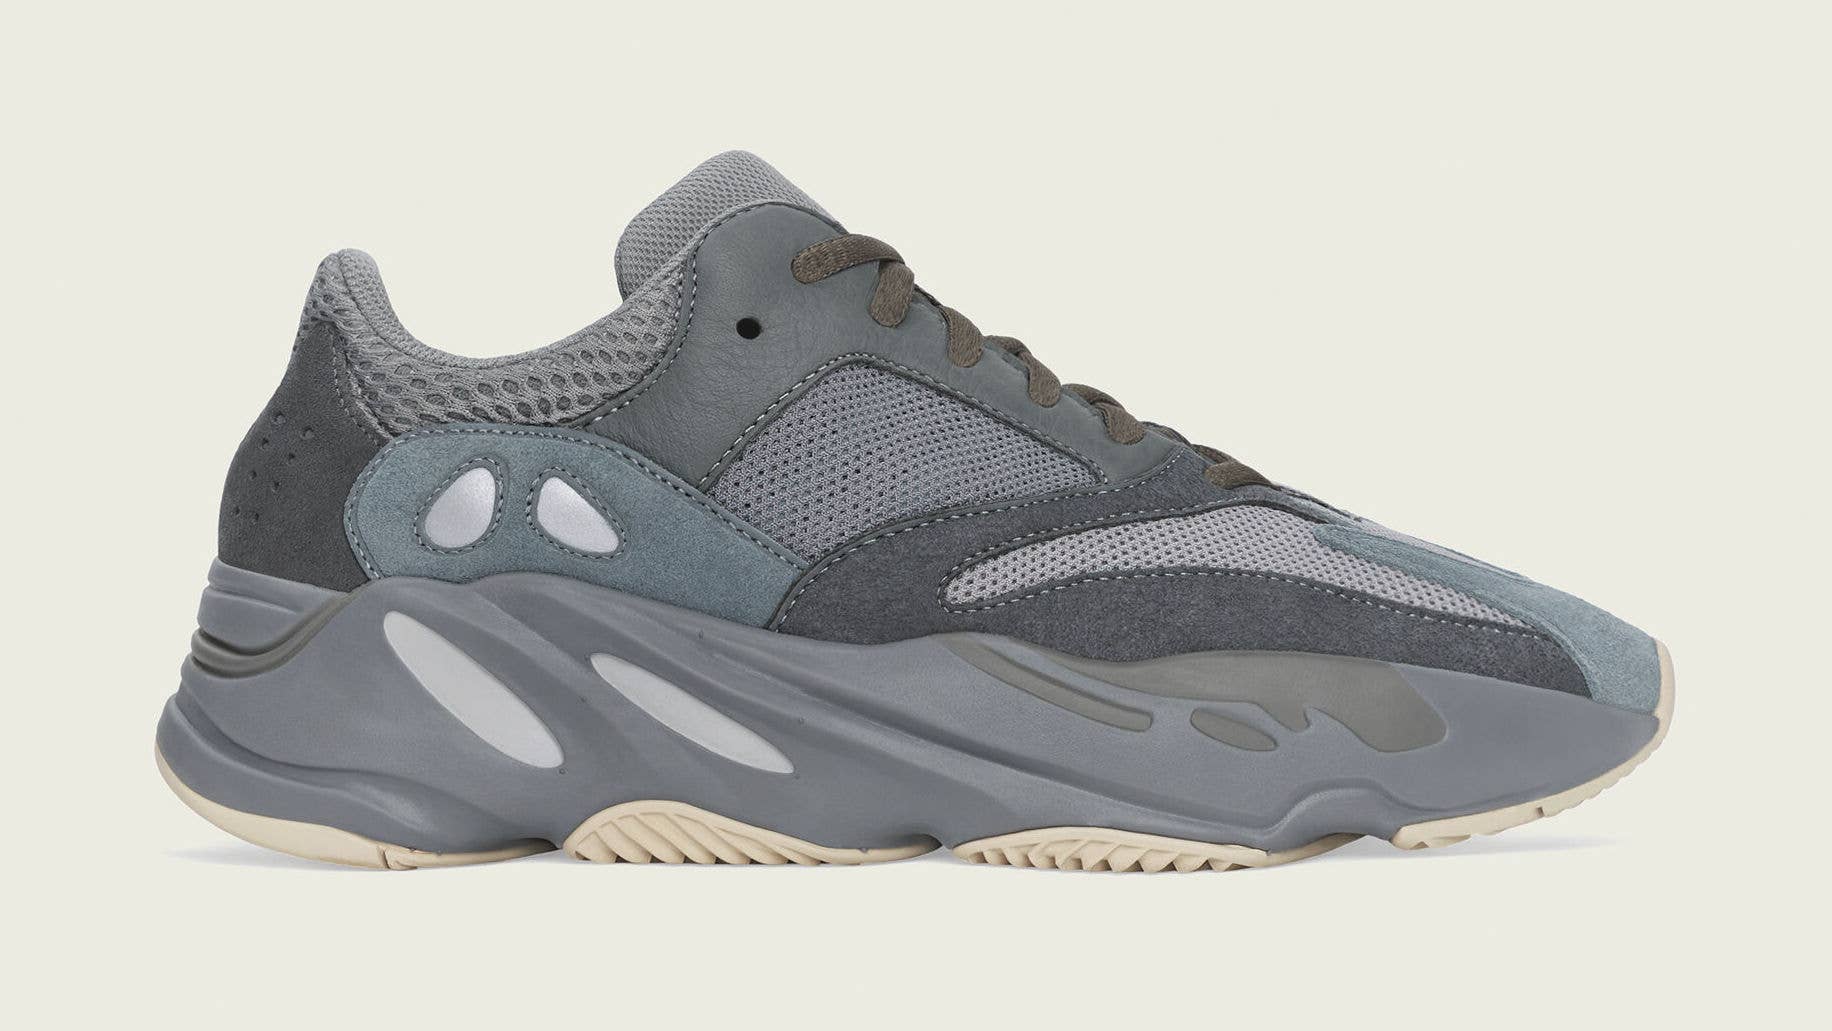 adidas yeezy boost 700 teal blue fw2499 lateral